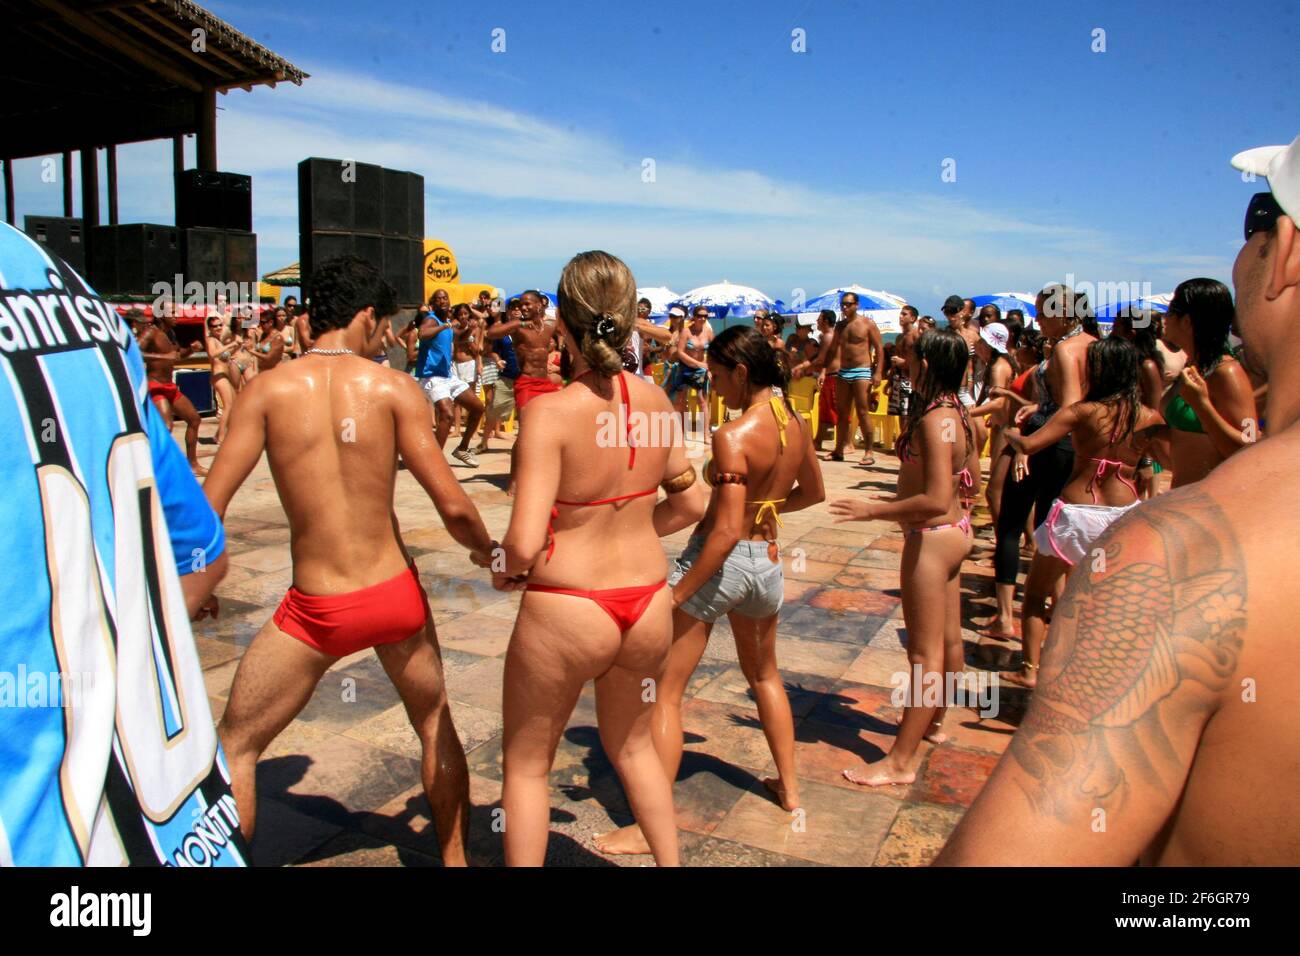 porto seguro, bahia, brazil - december 29, 2008: people are seen during a  party in a beach hut in the city of Porto Seguro, in the south of Bahia.  *** Stock Photo - Alamy